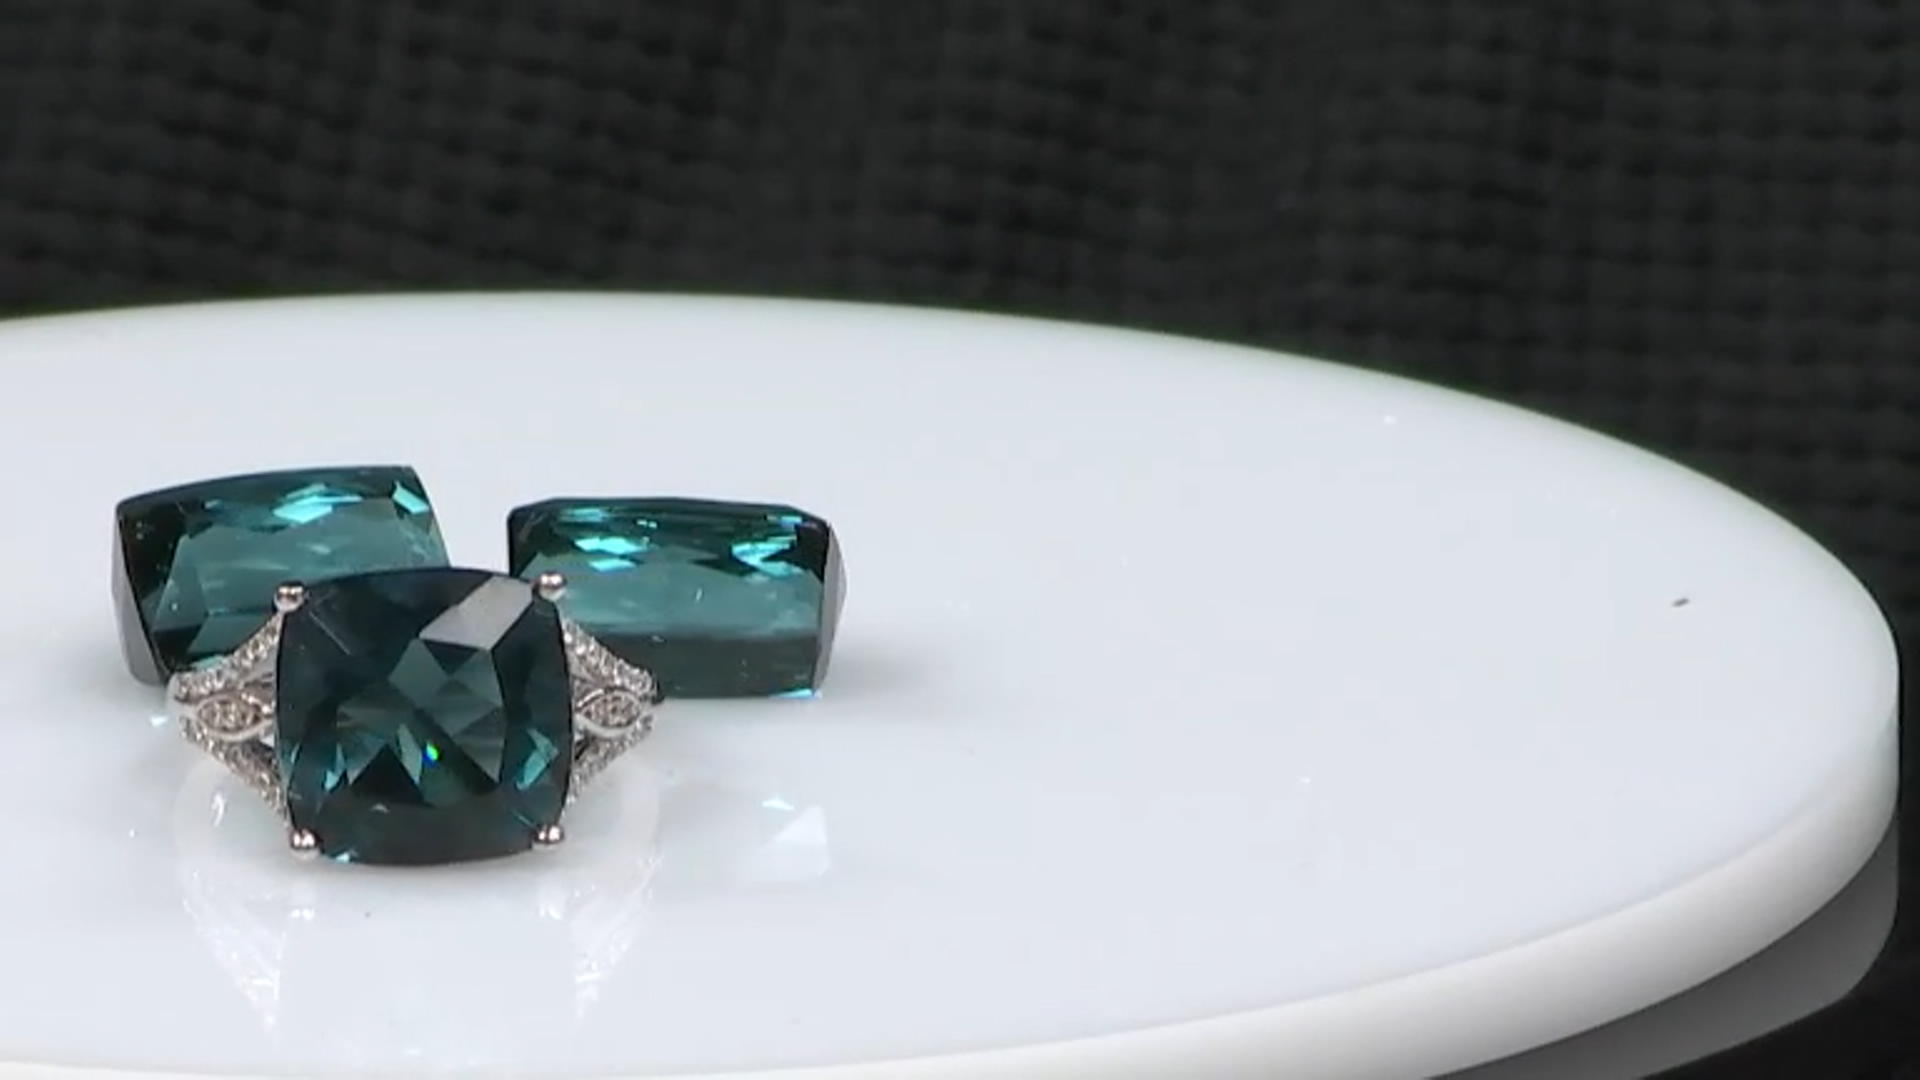 Teal Fluorite Rhodium Over Silver Ring 7.40ctw